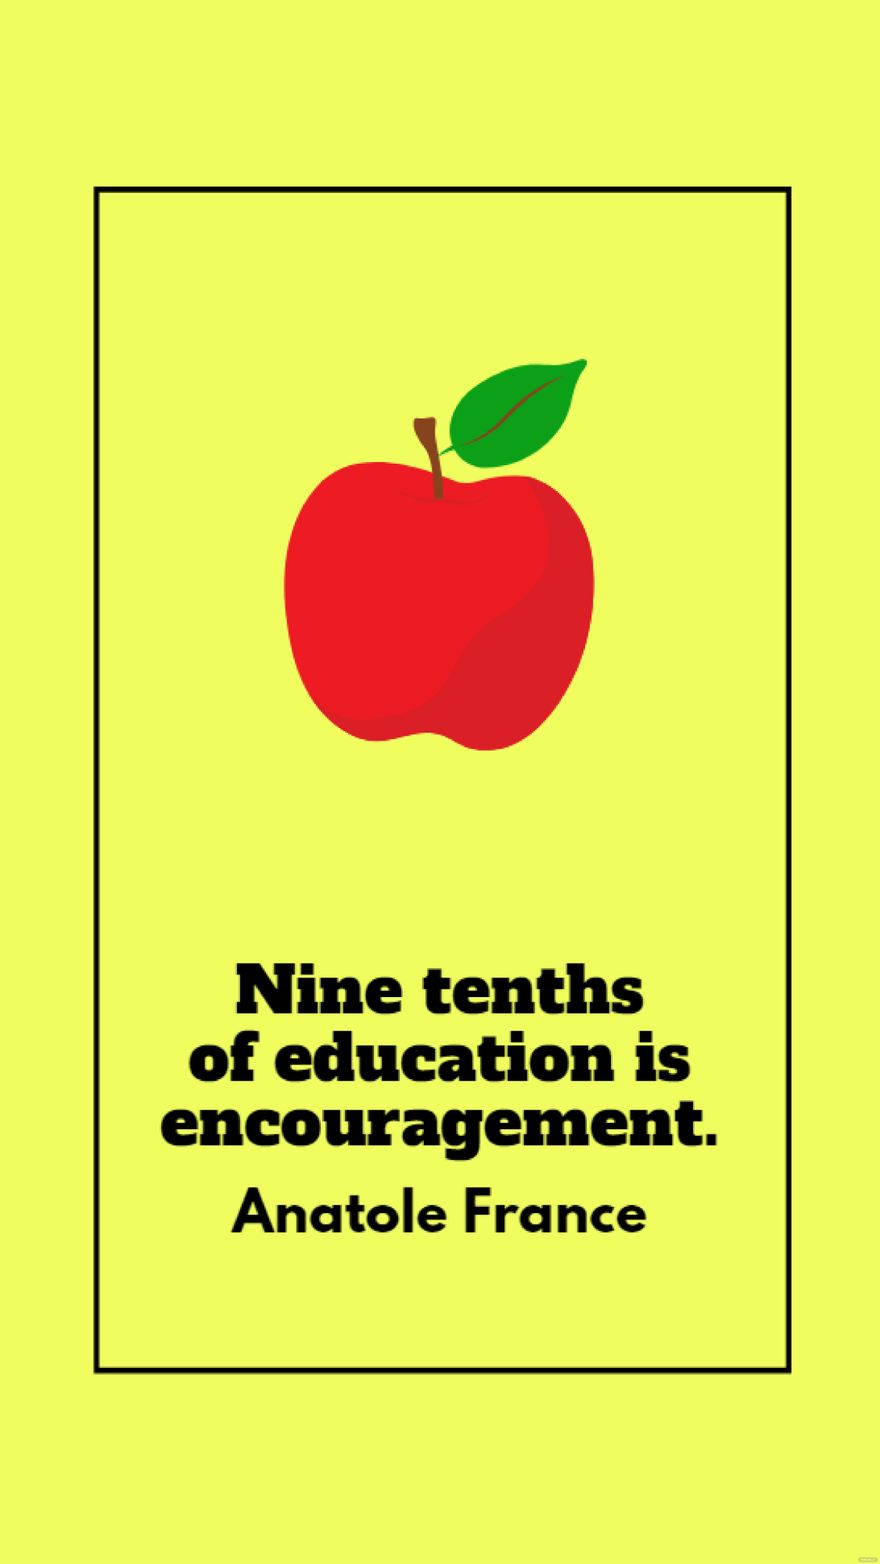 Anatole France - Nine tenths of education is encouragement. in JPG